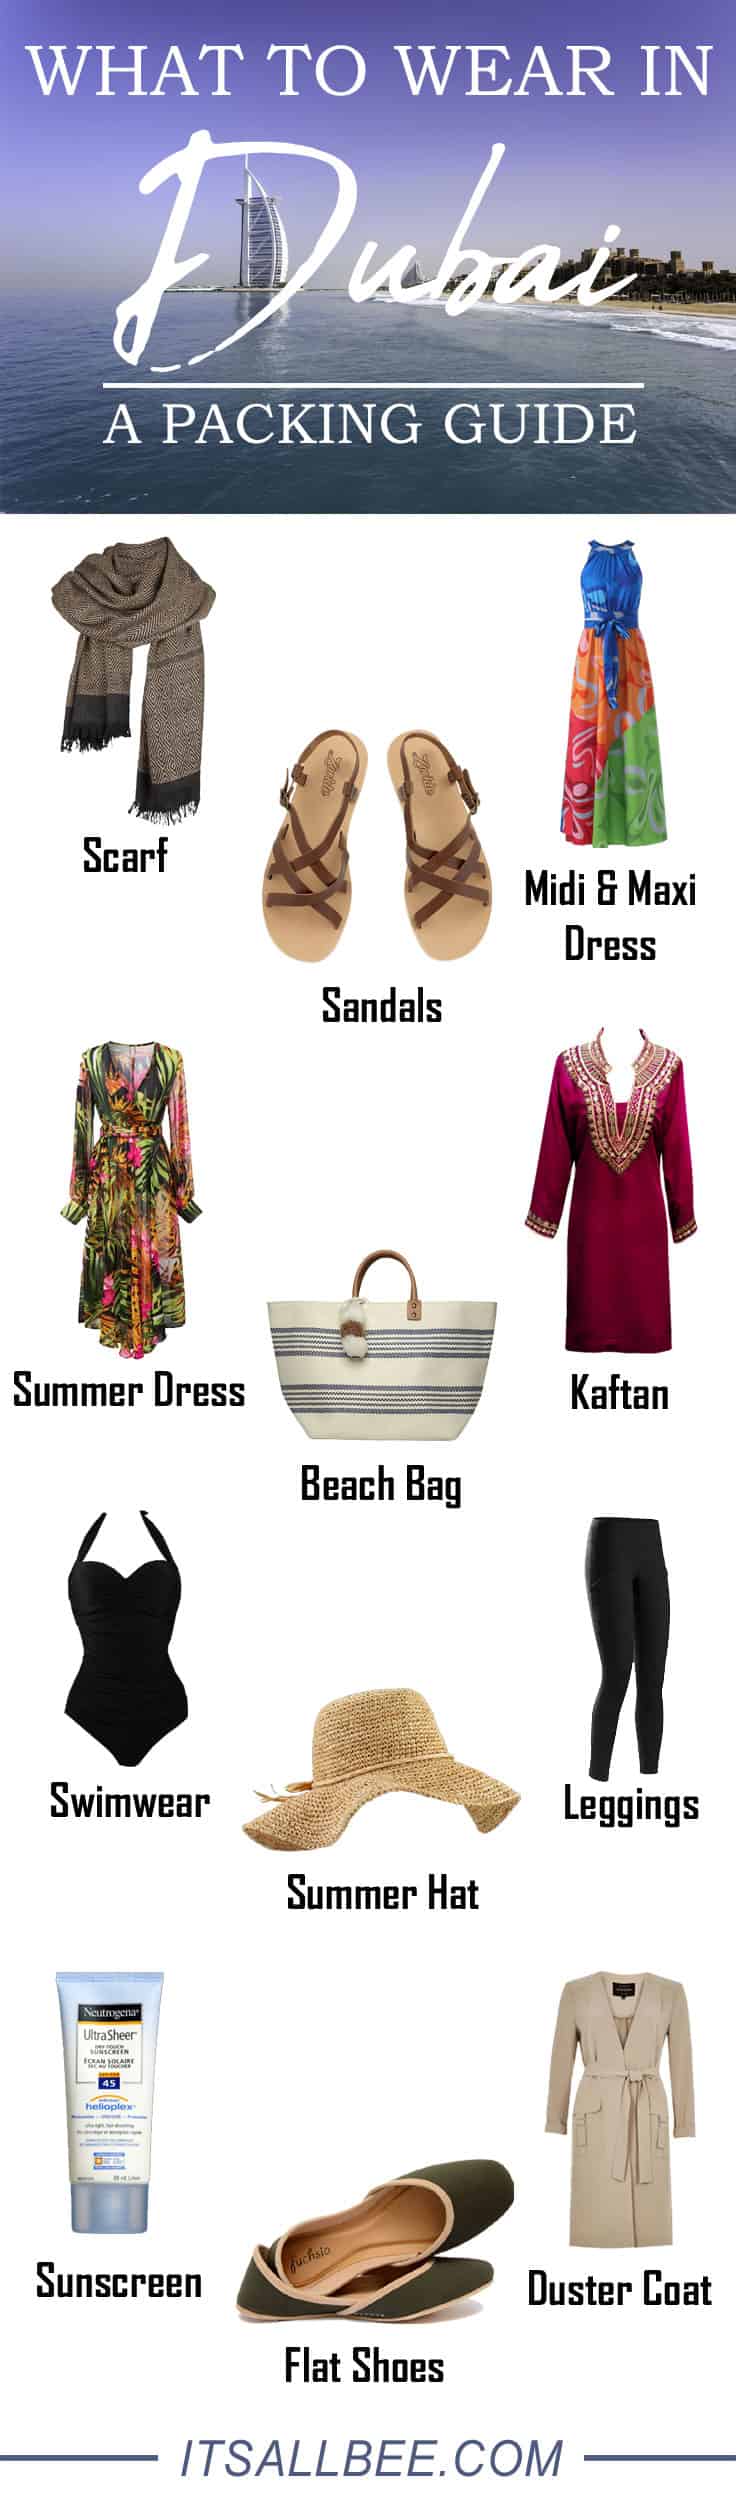 What To Wear When Visiting Dubai